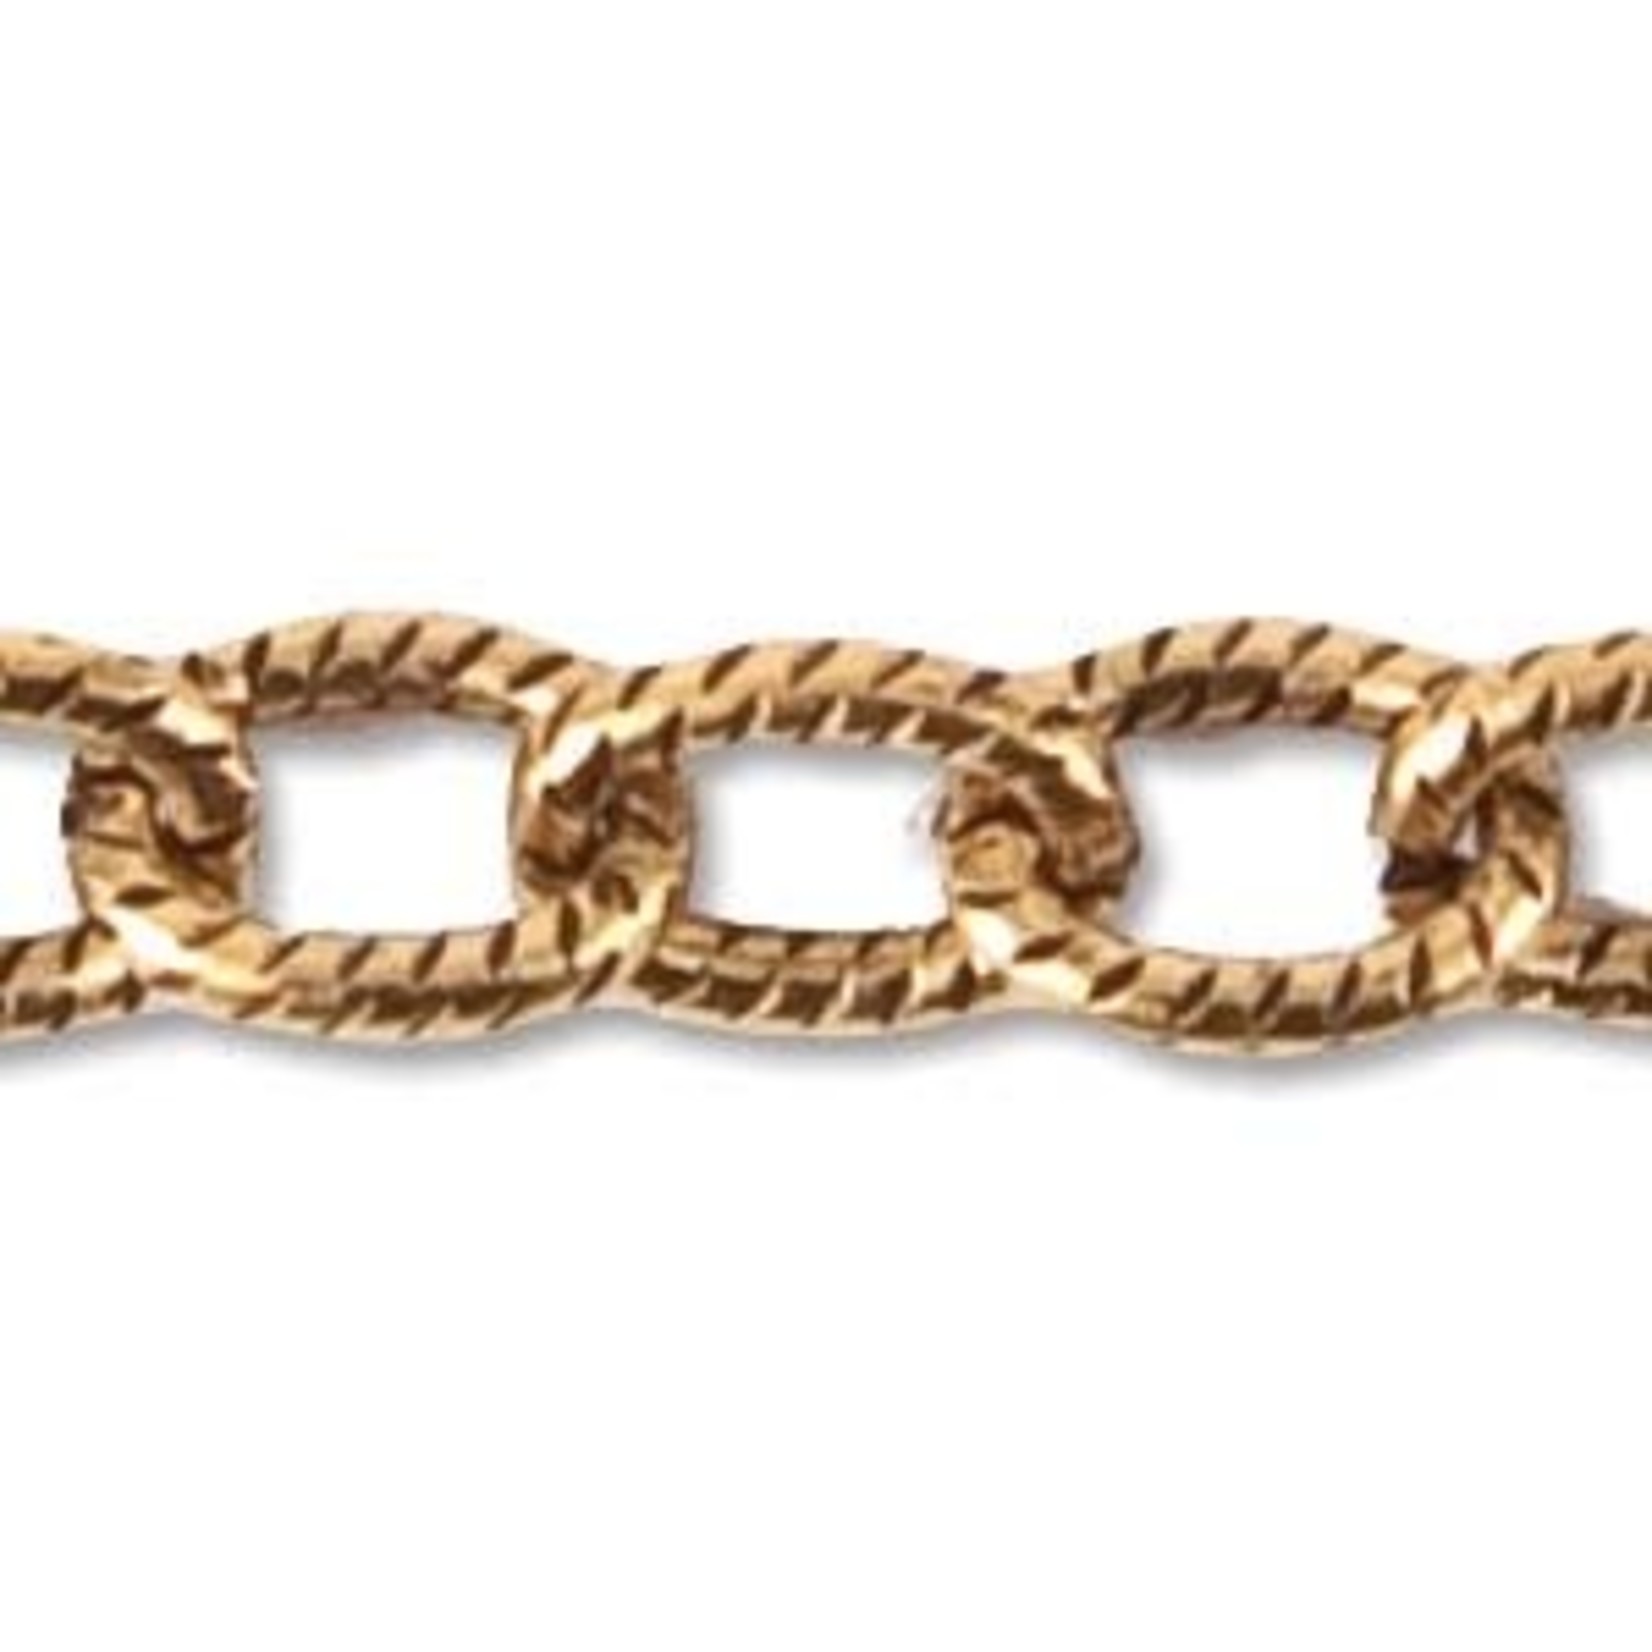 Nunn Design Small Textured Cable Chain - Antique Gold Plated